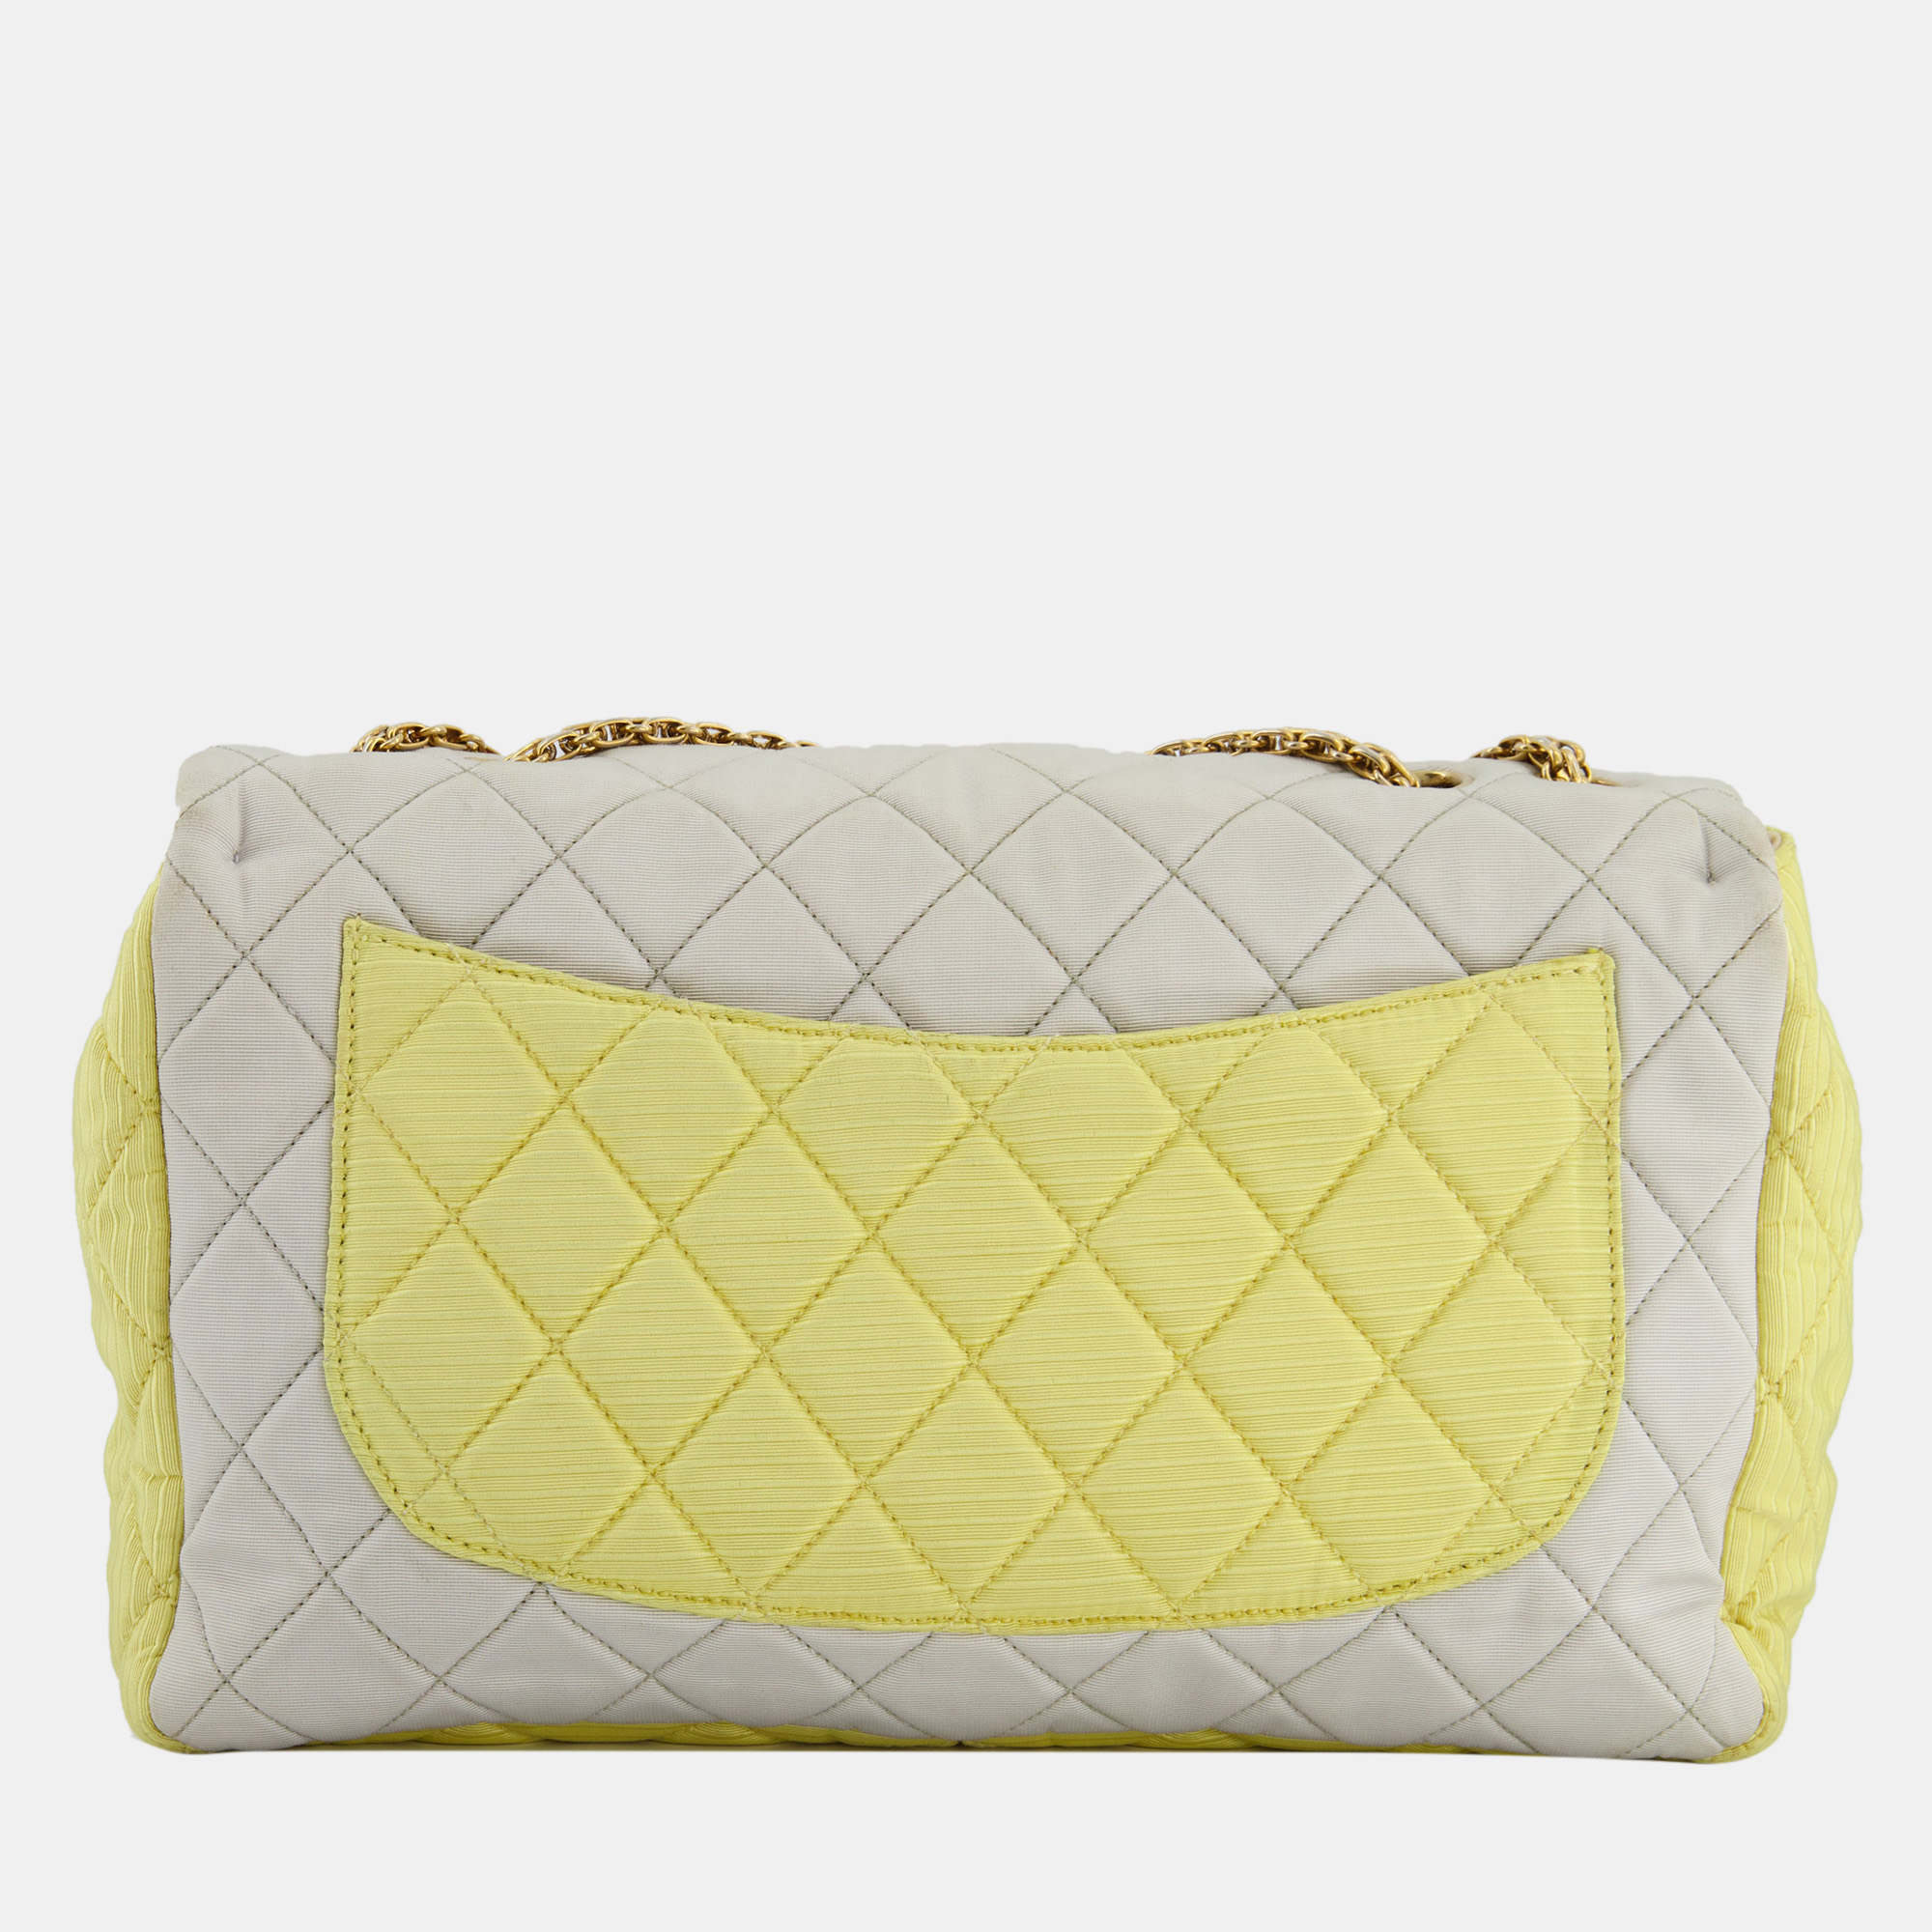 Chanel Large Jersey Reissue Pastel Yellow, Grey And Pink With Antique Gold Hardware